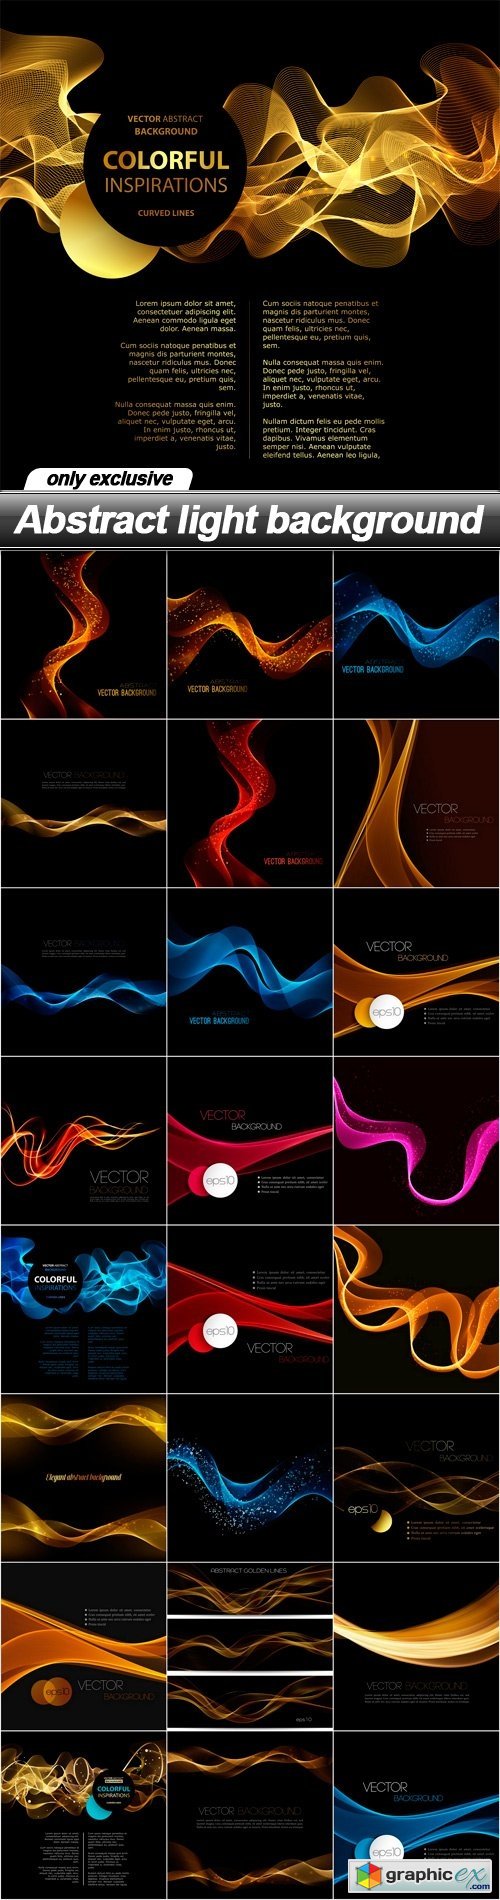 Abstract light background - 25 EPS